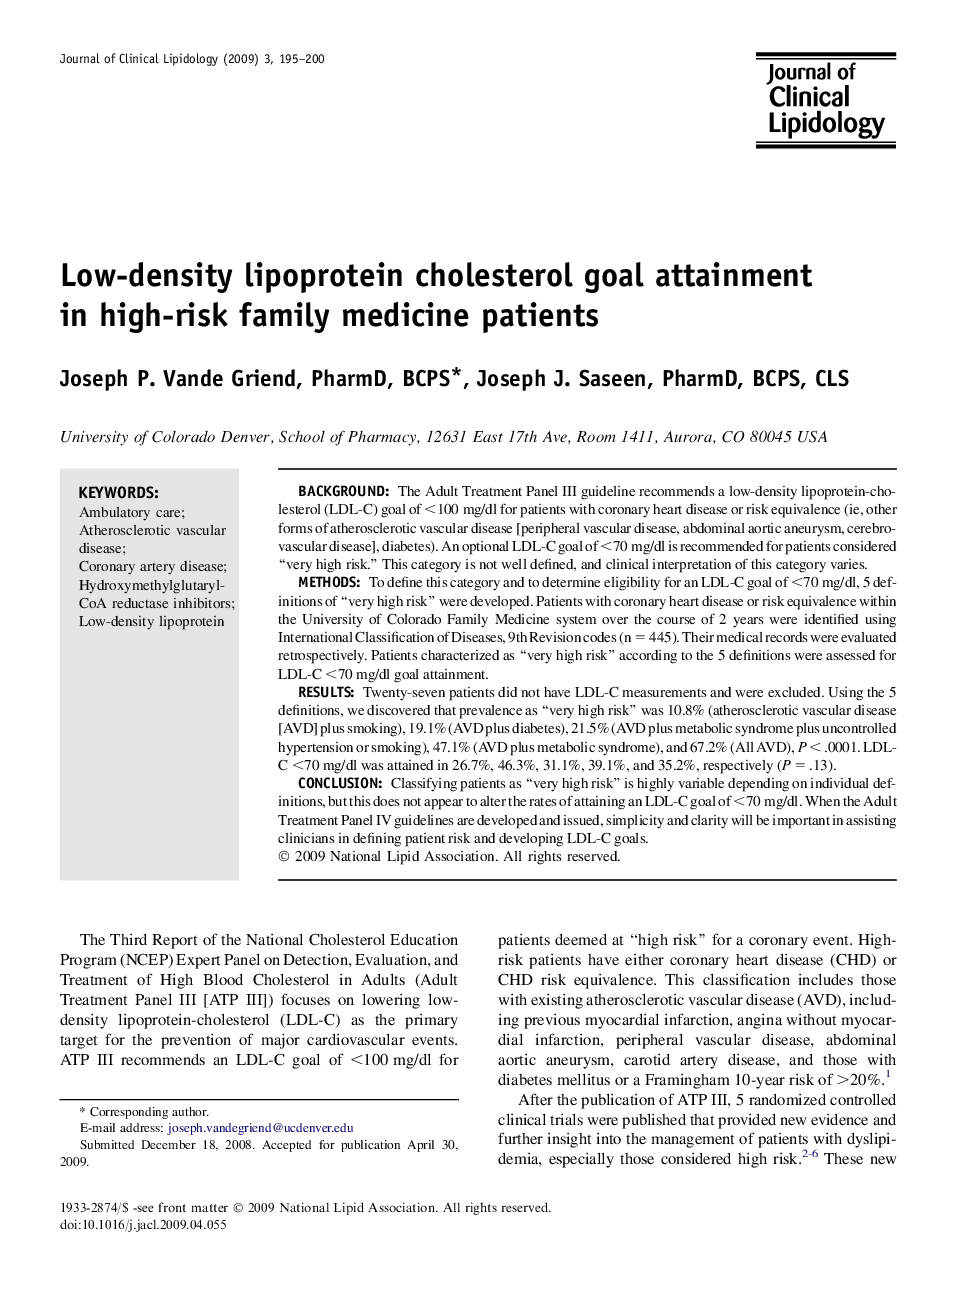 Low-density lipoprotein cholesterol goal attainment in high-risk family medicine patients